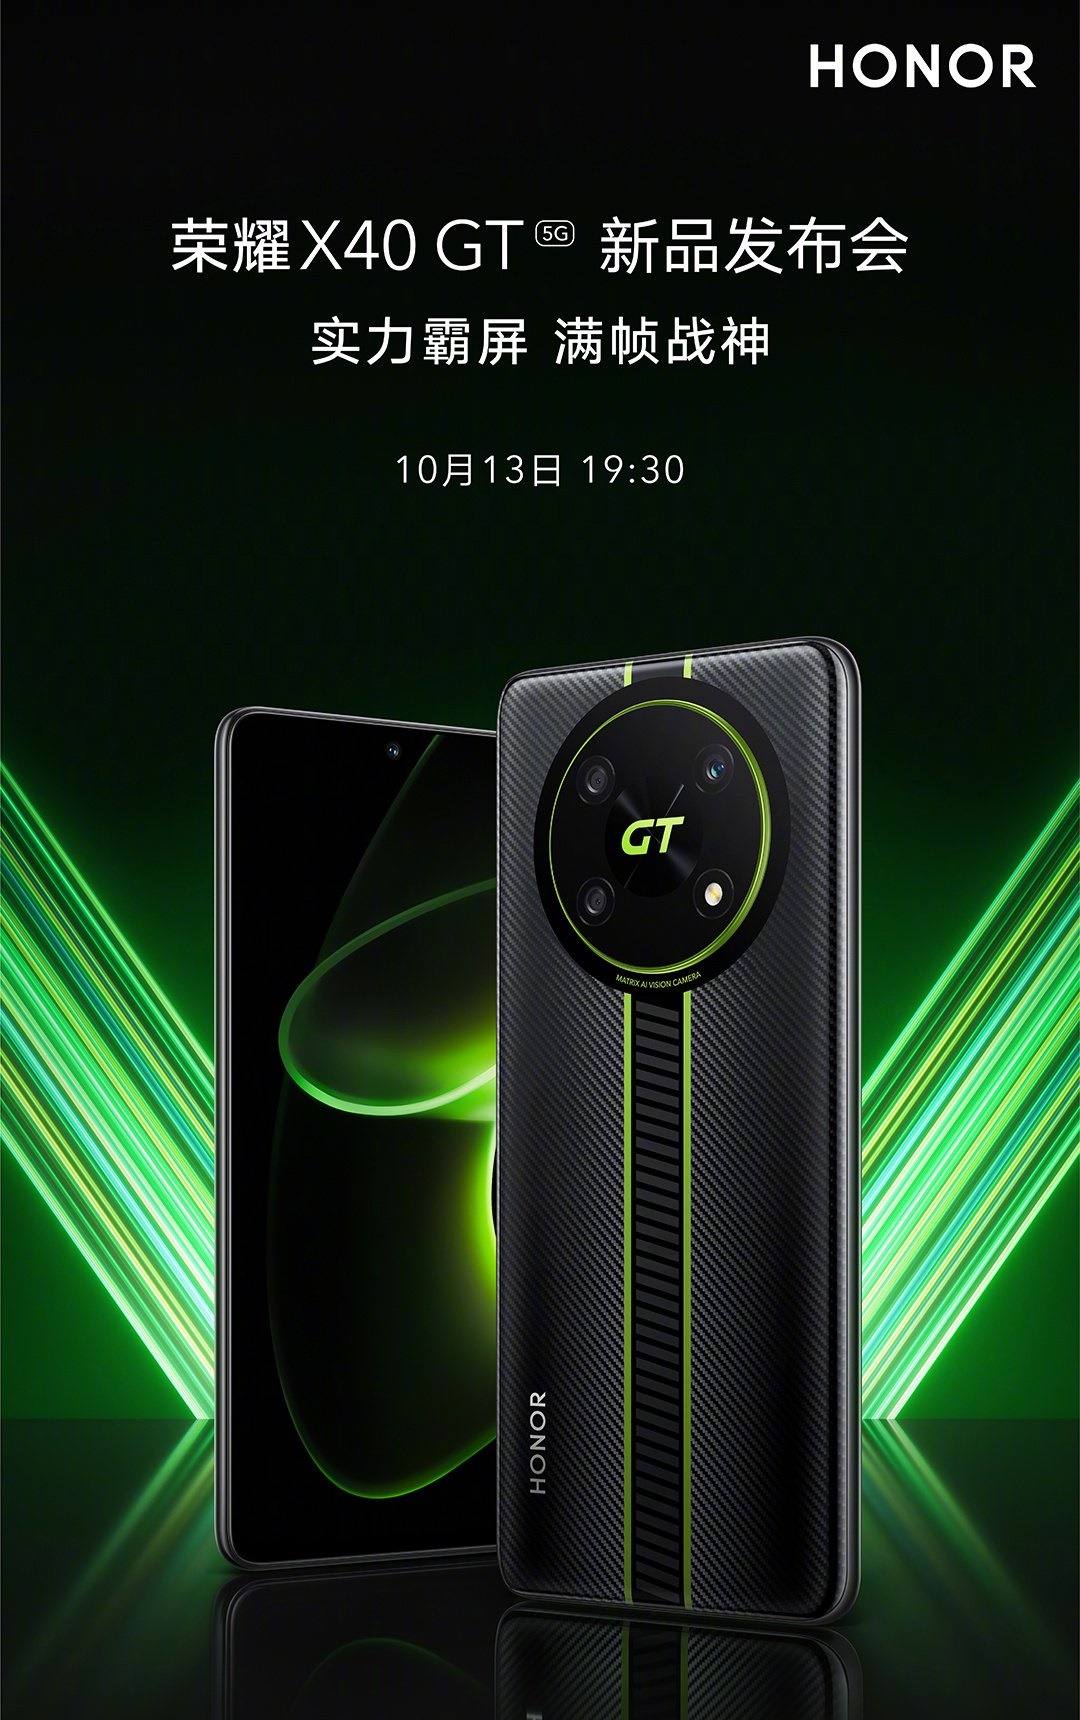 HONOR X40 GT